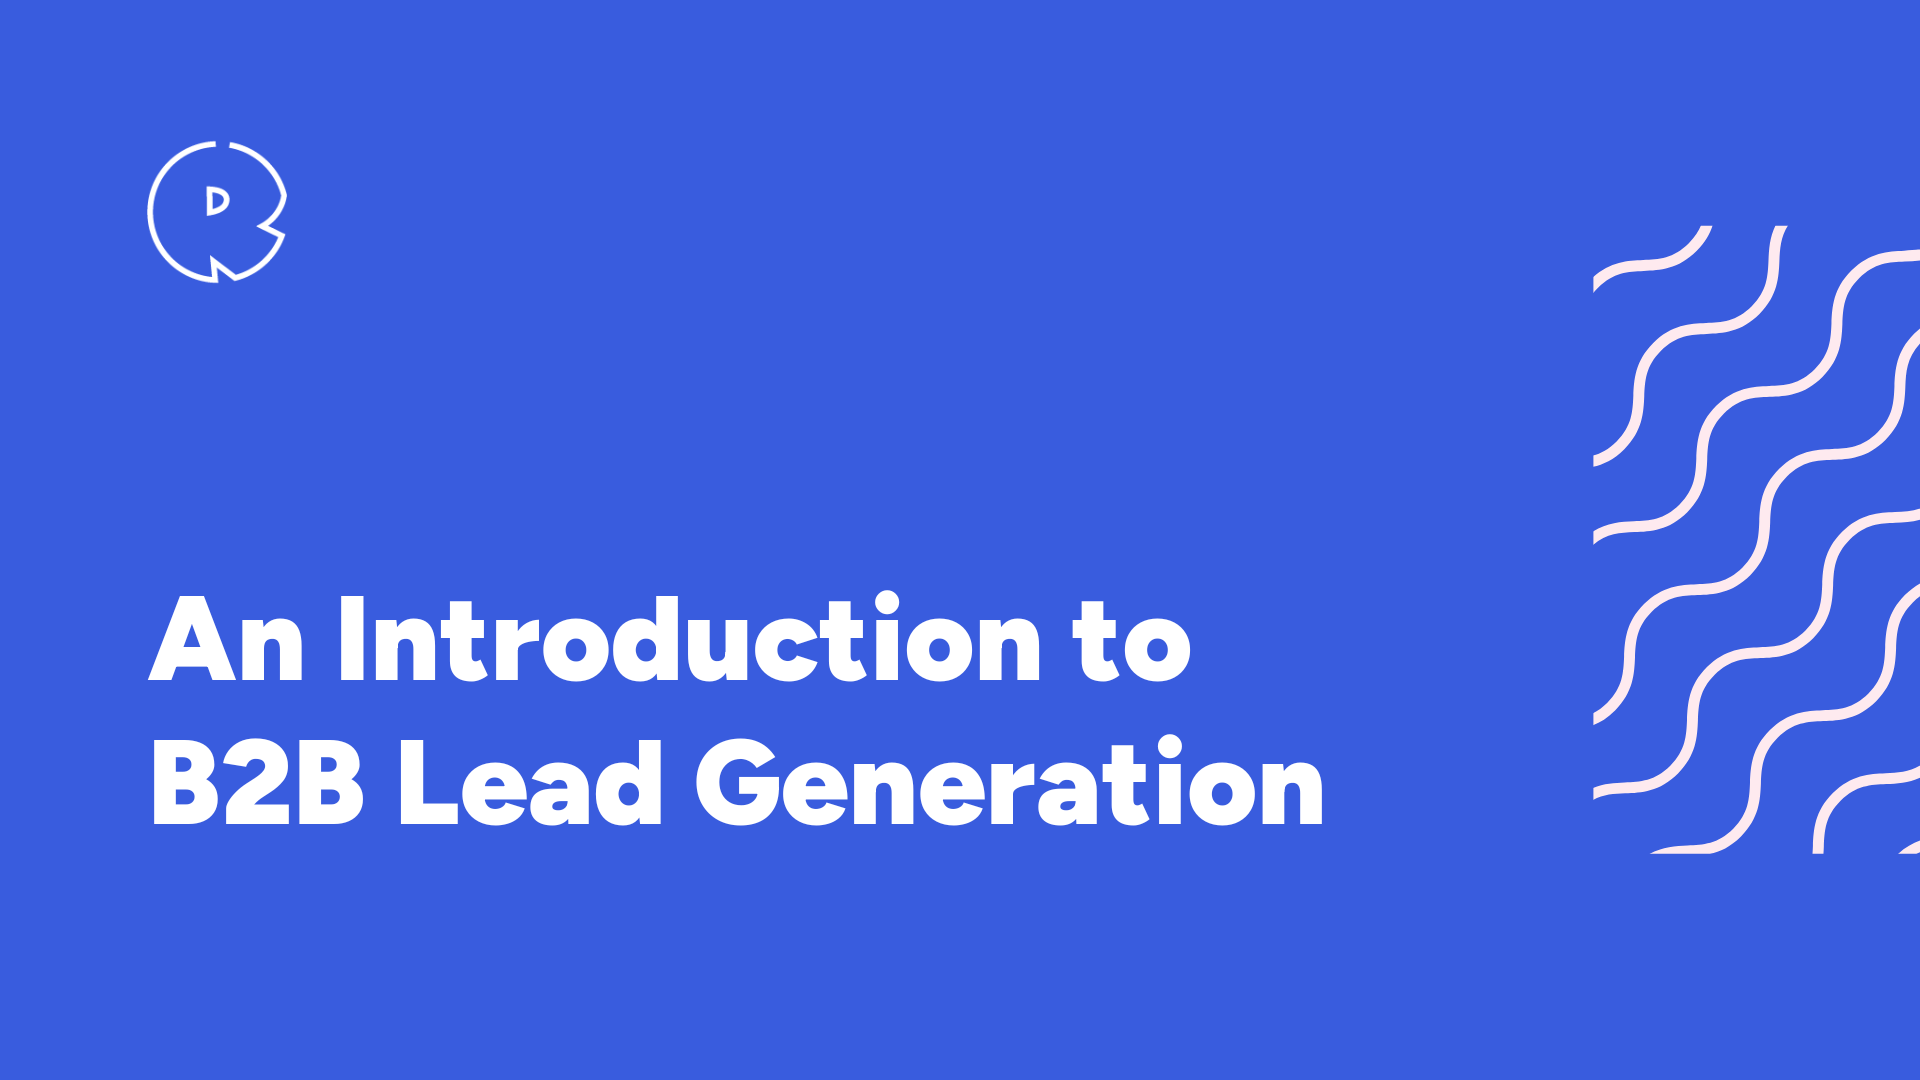 An Introduction to B2B Lead Generation